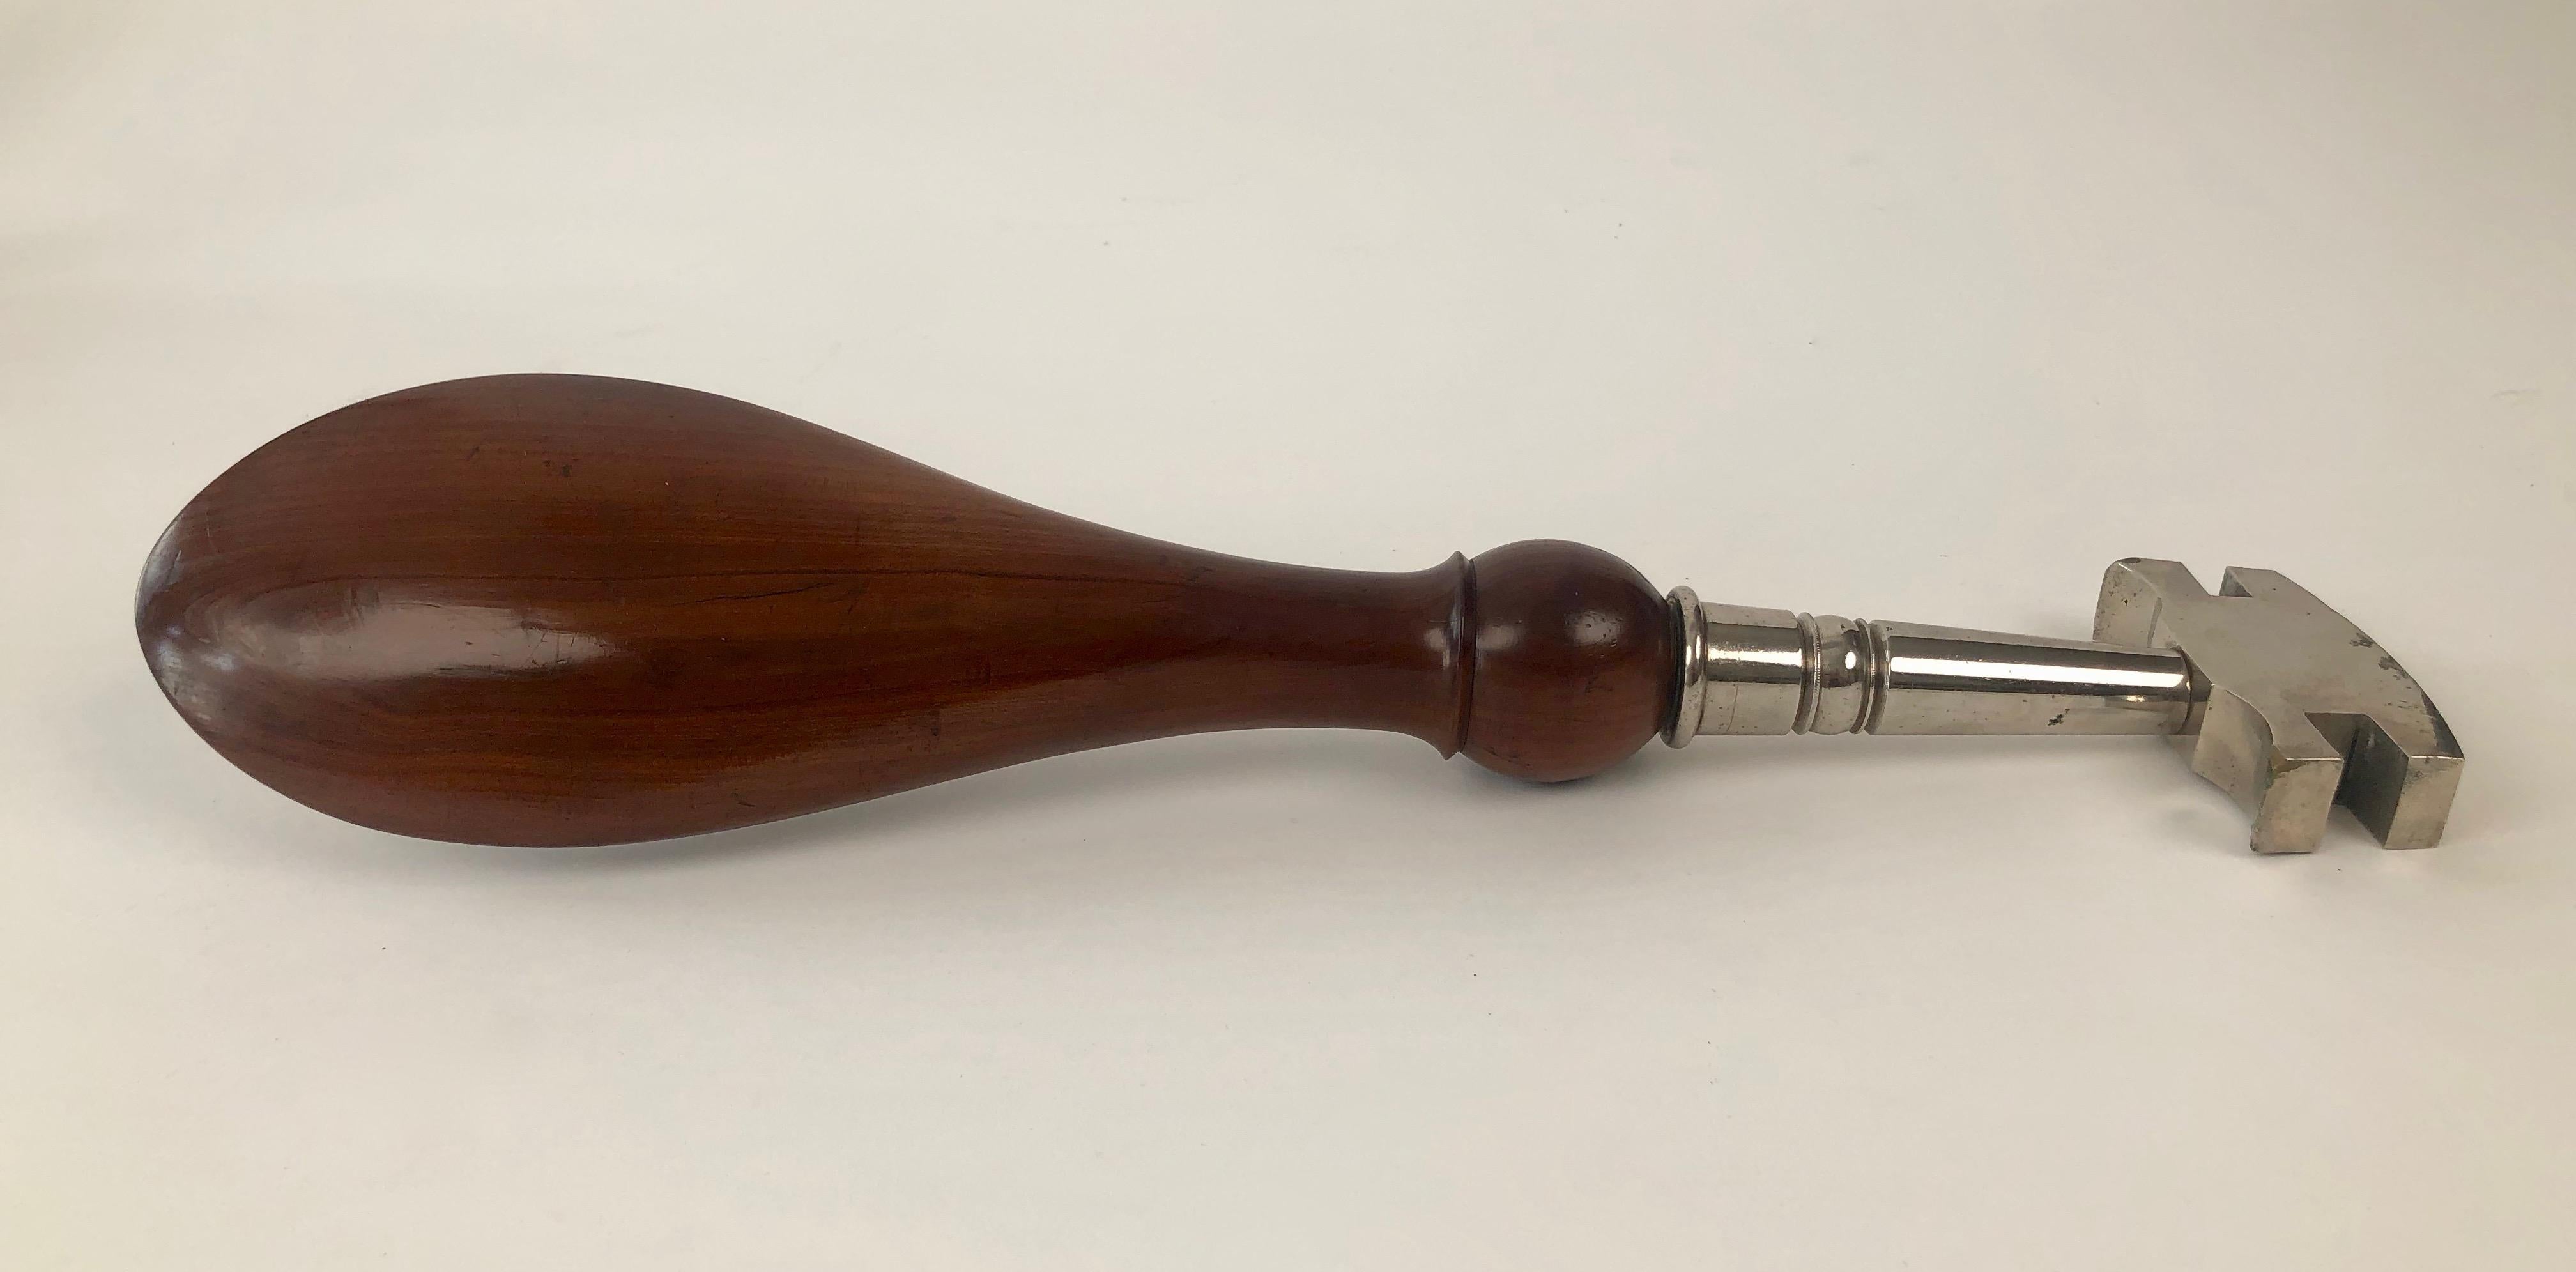 If you have been looking for an unusual gift , this decorative industria glass cutter might be it.

The large , handmade walnut handle is designed to fit under arm. A mother of pearl
disc has been perfectly inlayed into the wood and gives a